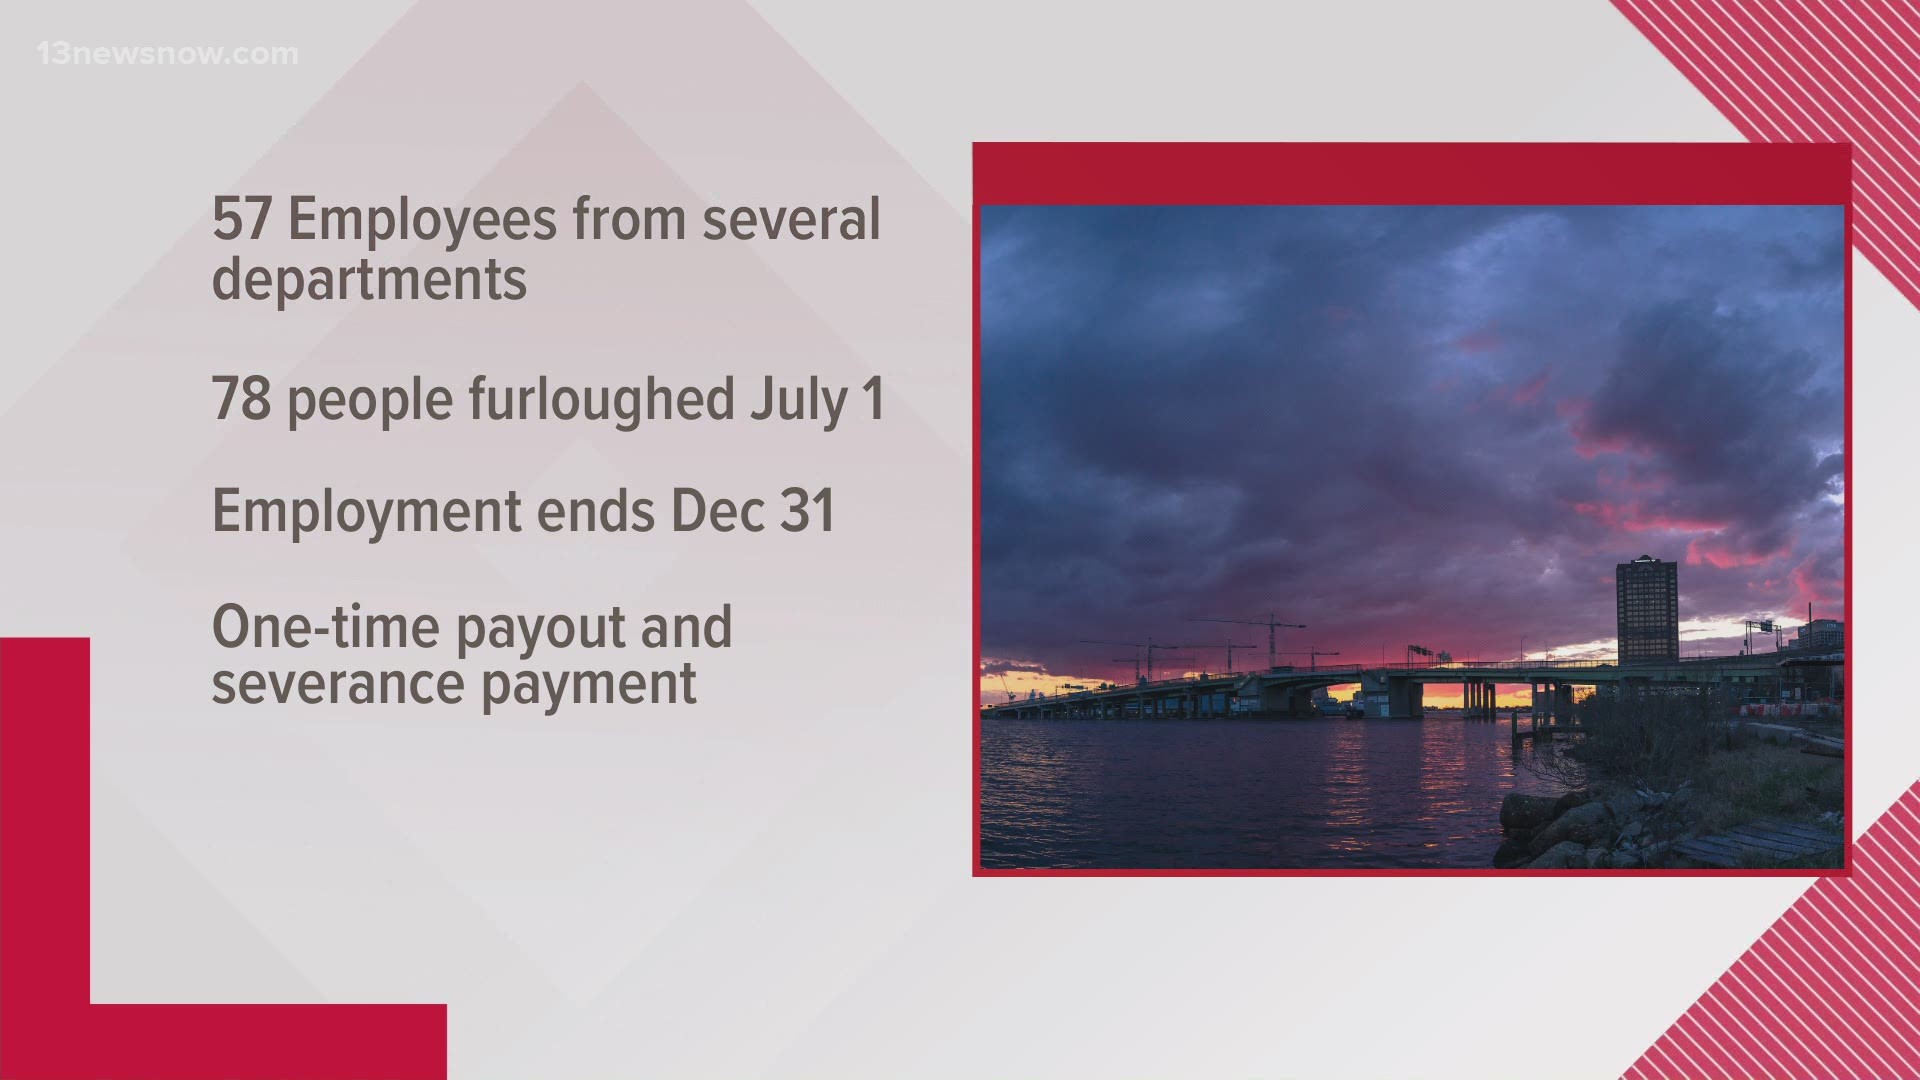 The employees are expected to get a one-time payout of unused leave time, and a severance payment, as they are laid off in December.